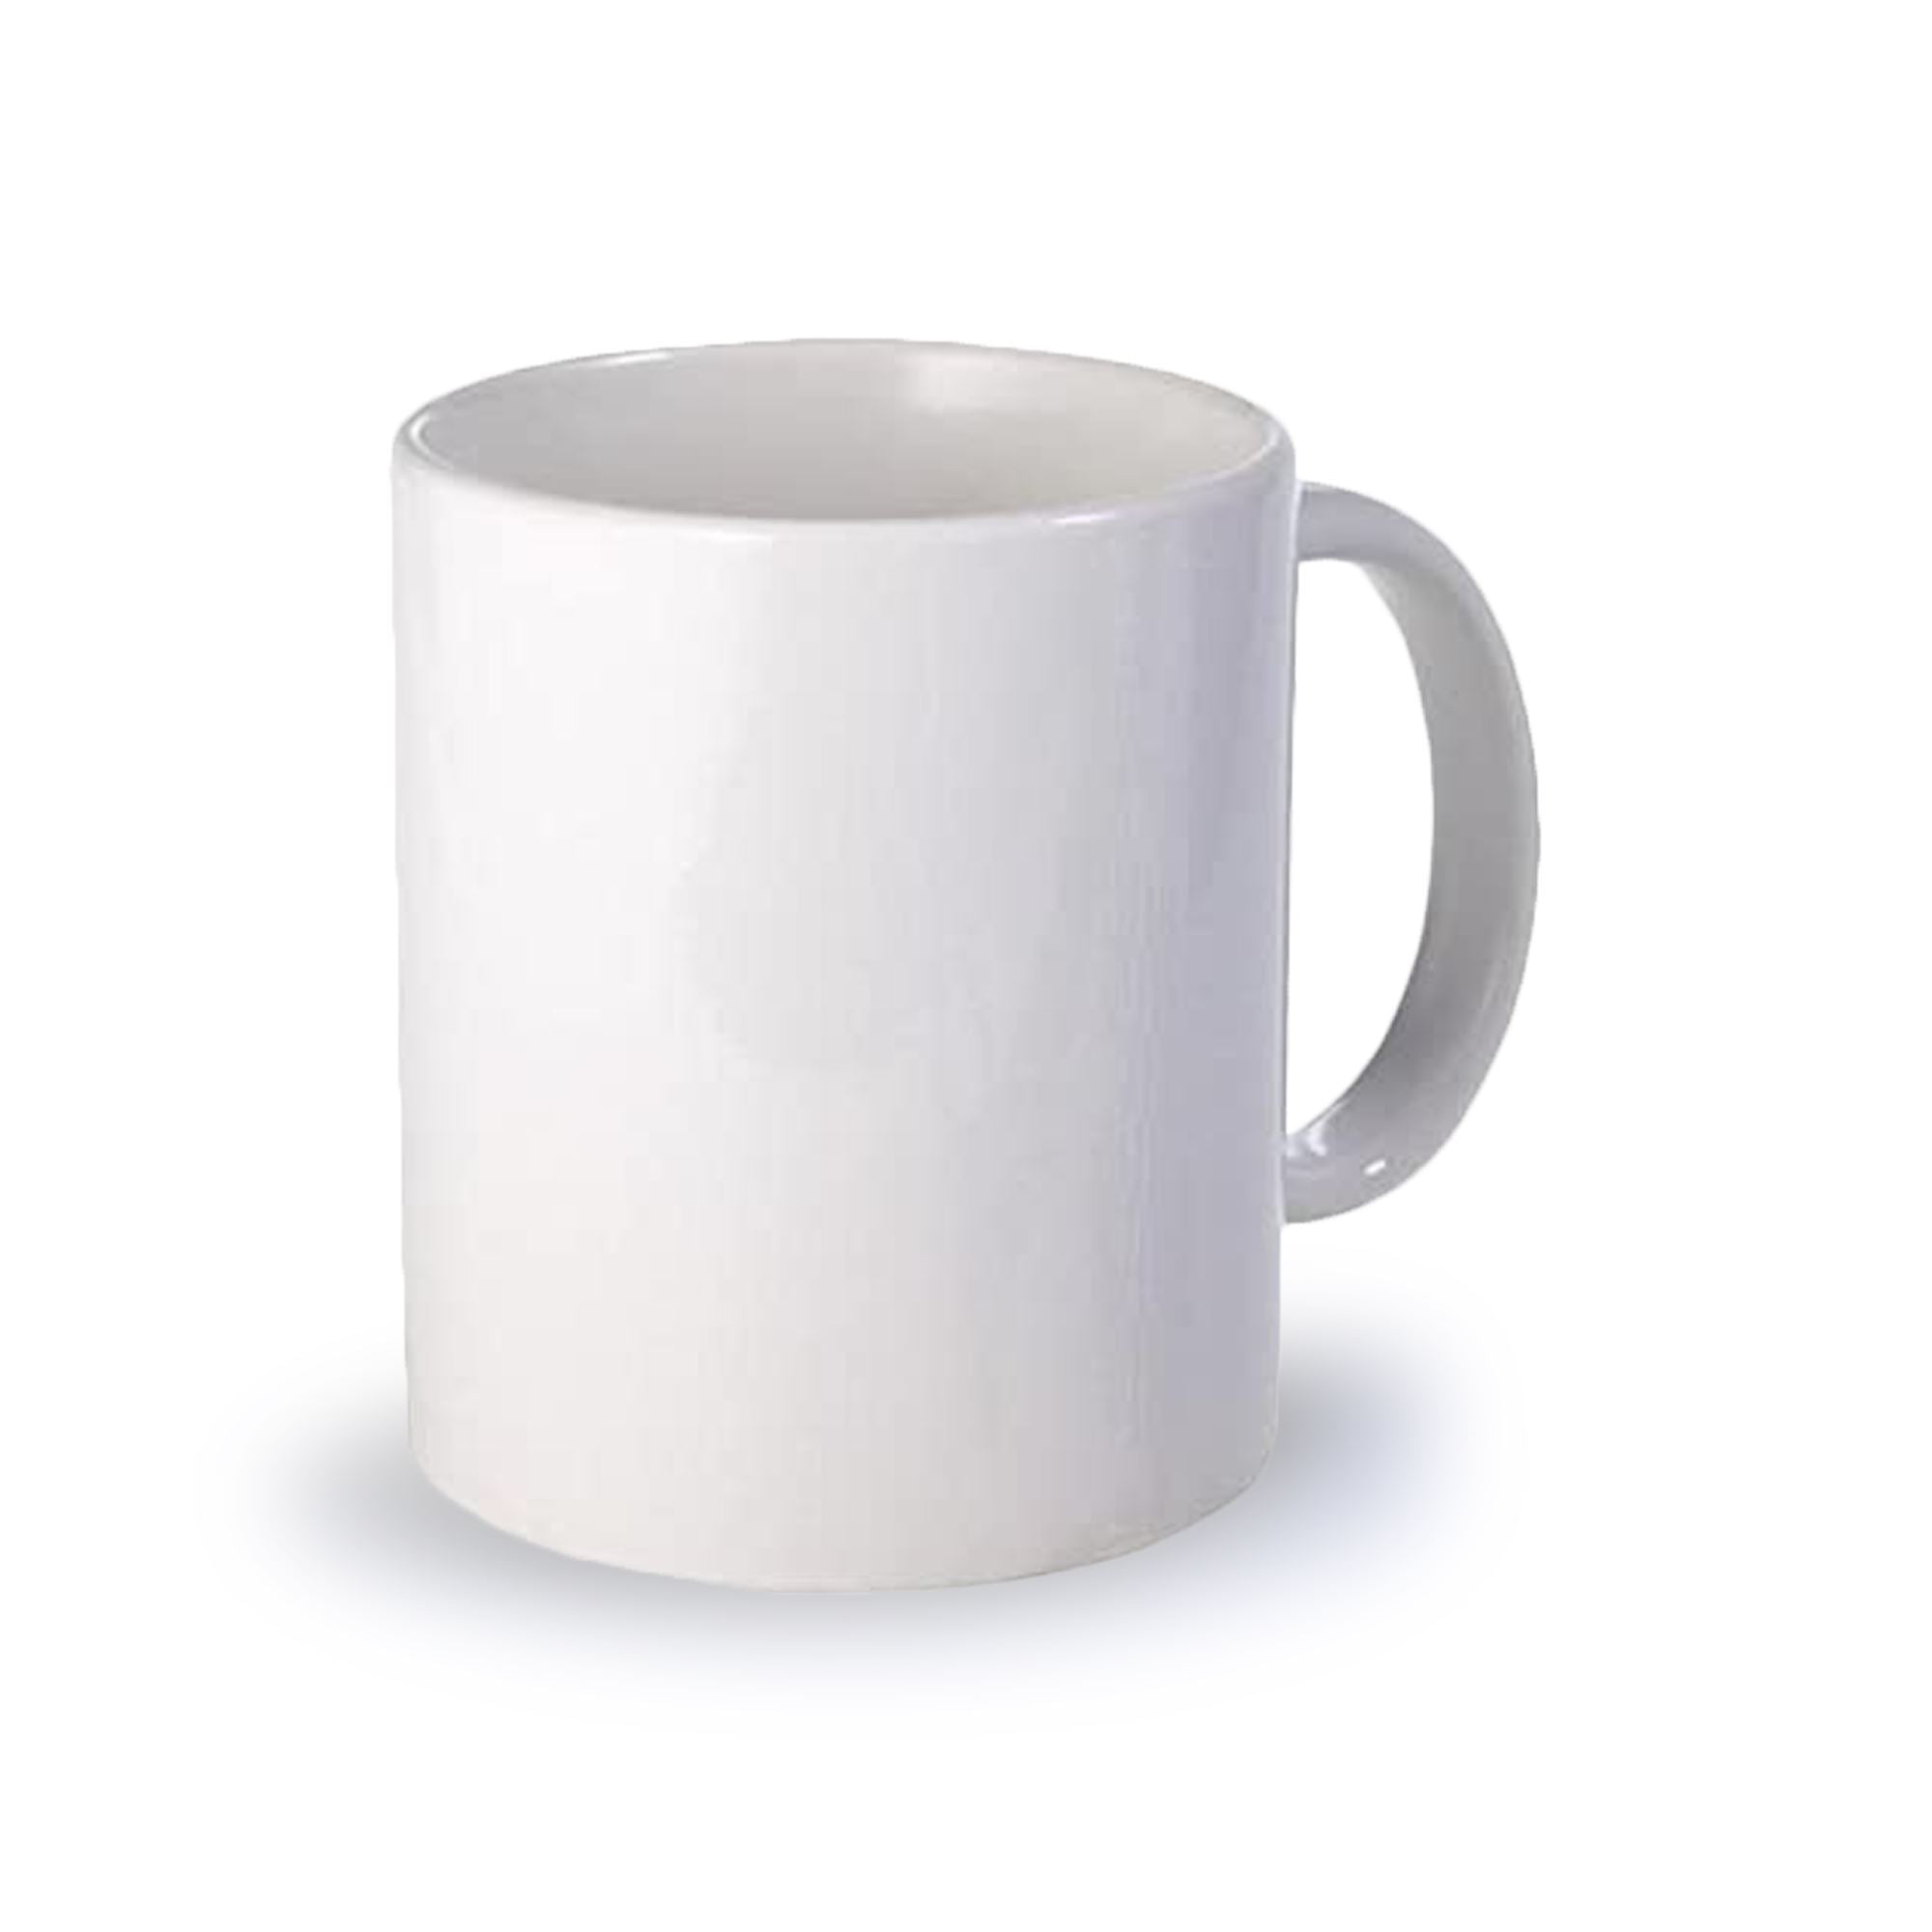 11 Oz Ceramic Sublimation Sublimation Coffee Mugs White Porcelain Blank  Blanks For Tea, Milk Latte, Hot Cocoa B1129 From Bestoffers, $2.65